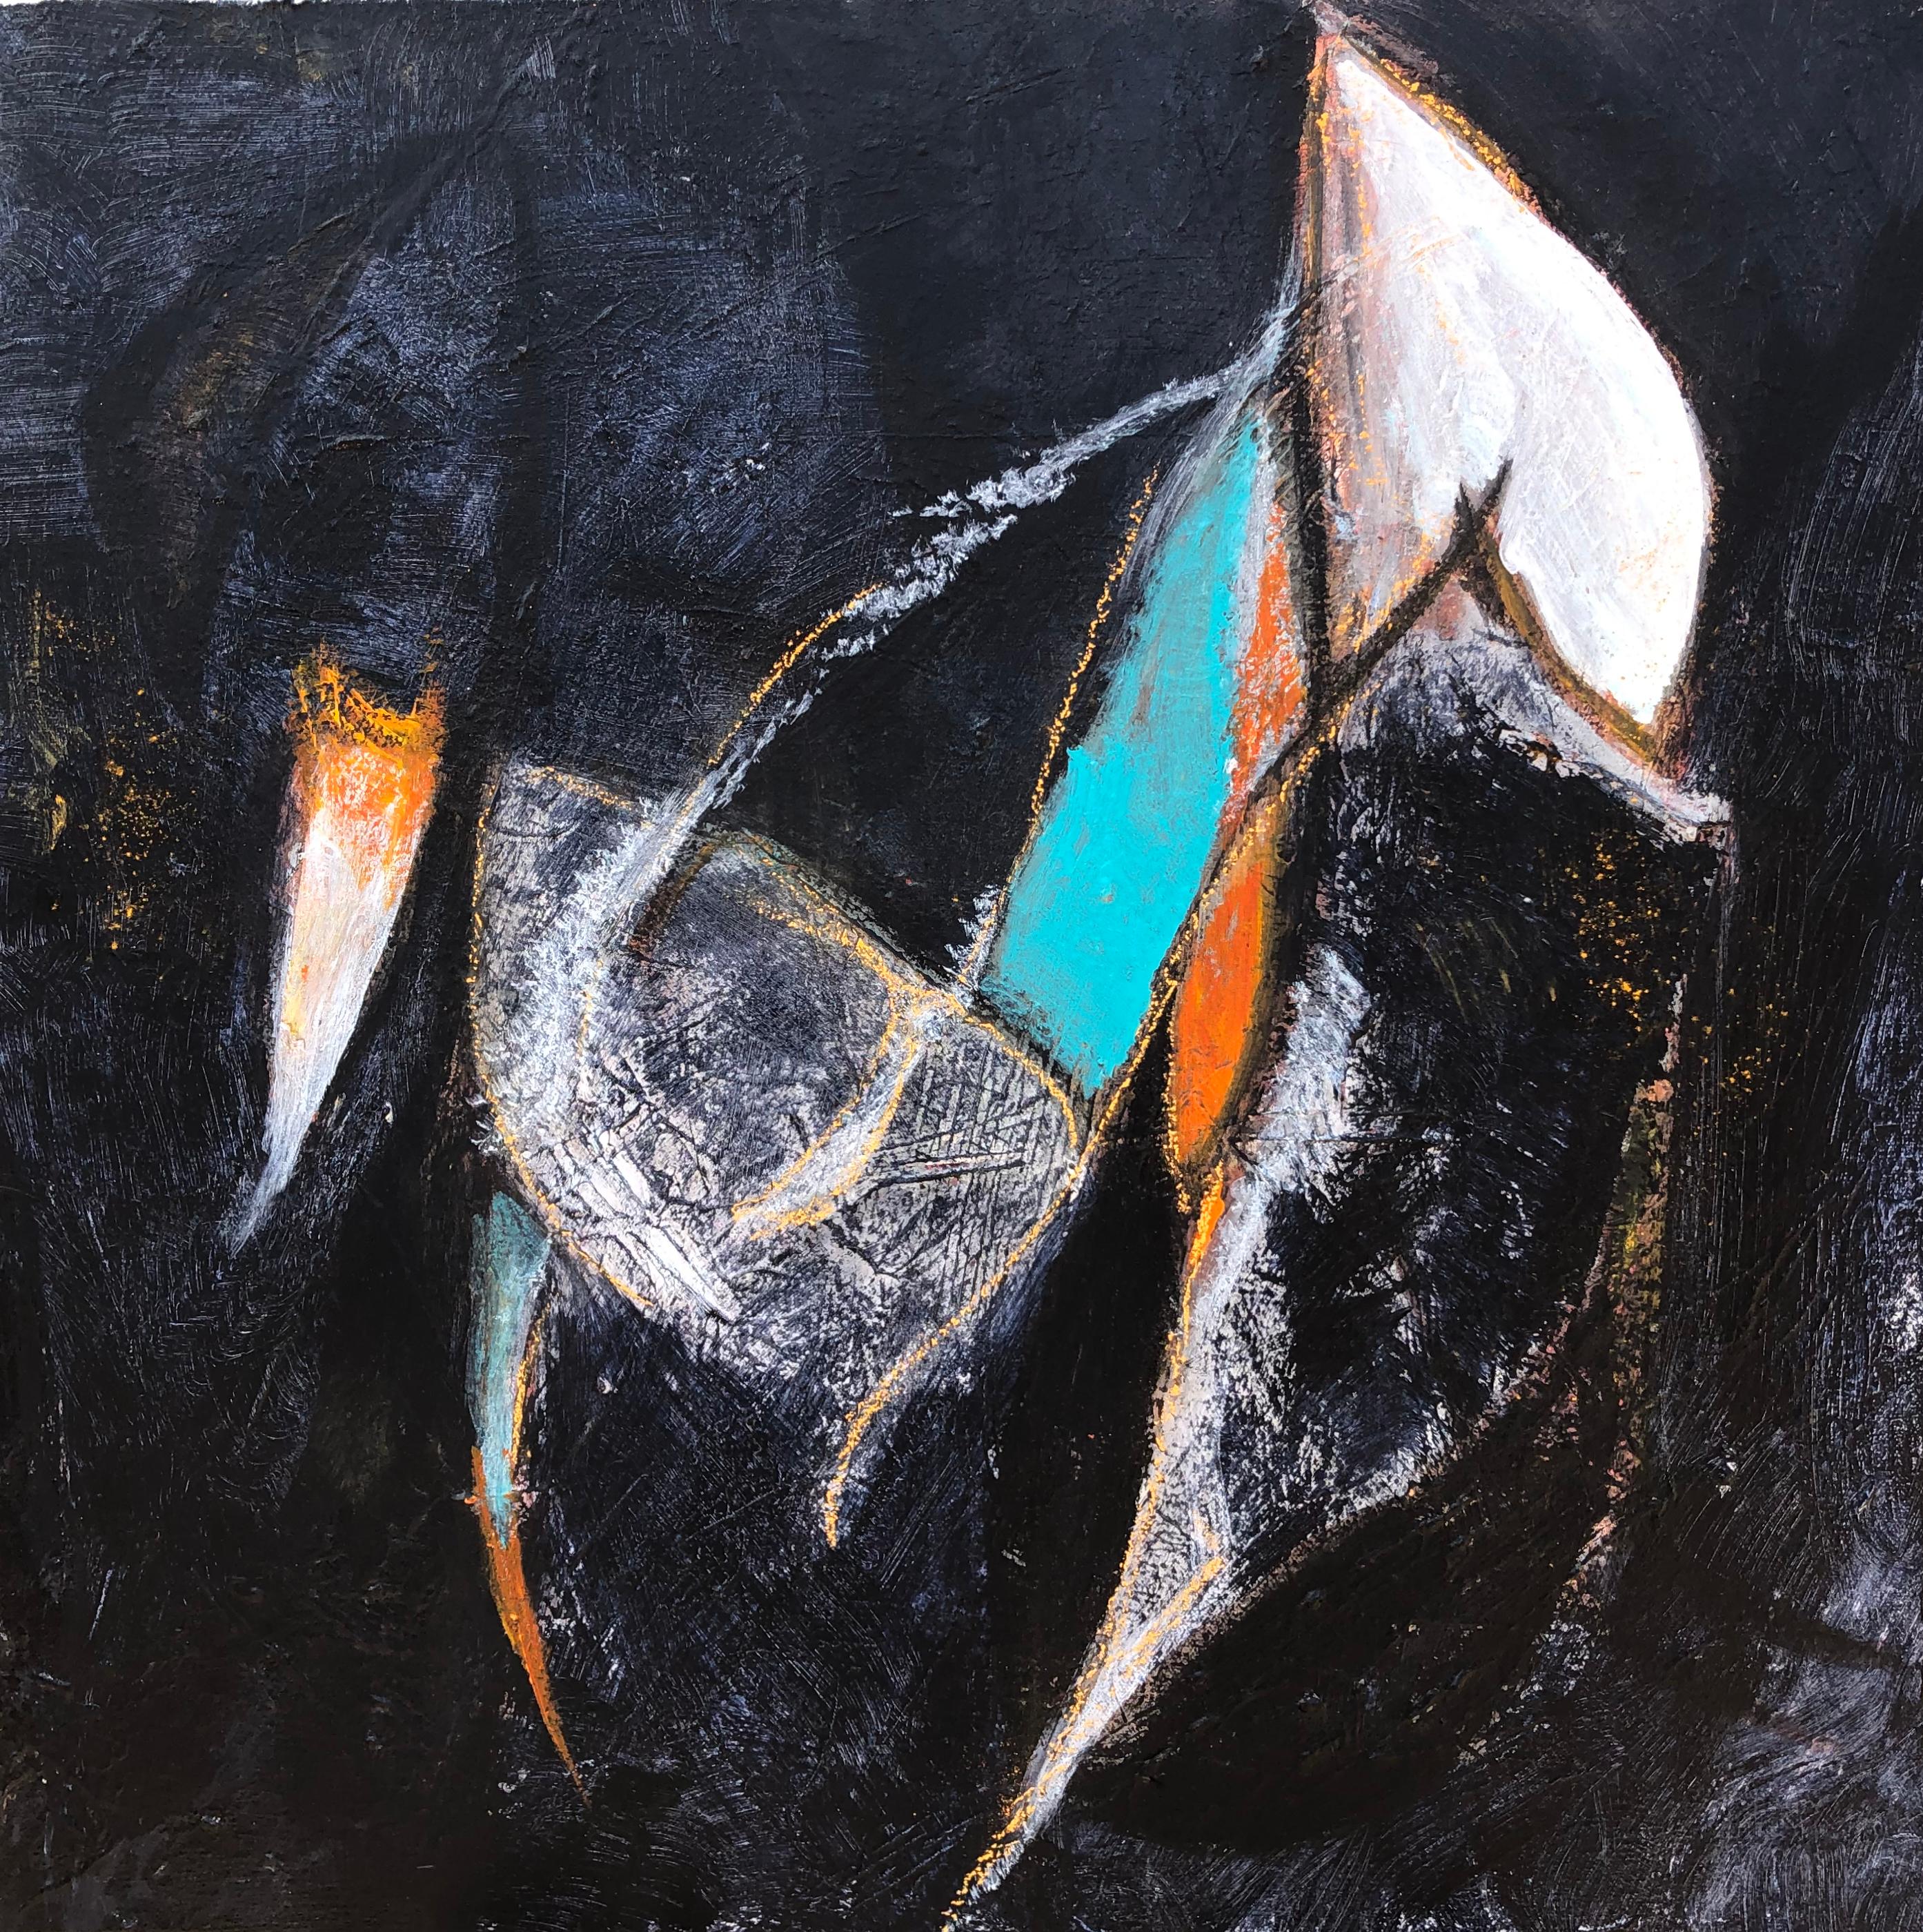 <p>Artist Comments<br>Artist Sharon Sieben presents an expressive abstract with complex structures in motion. The leaf-like contours embody the uncontrolled forces of nature. Bold shades of turquoise and orange glide rhythmically in winding